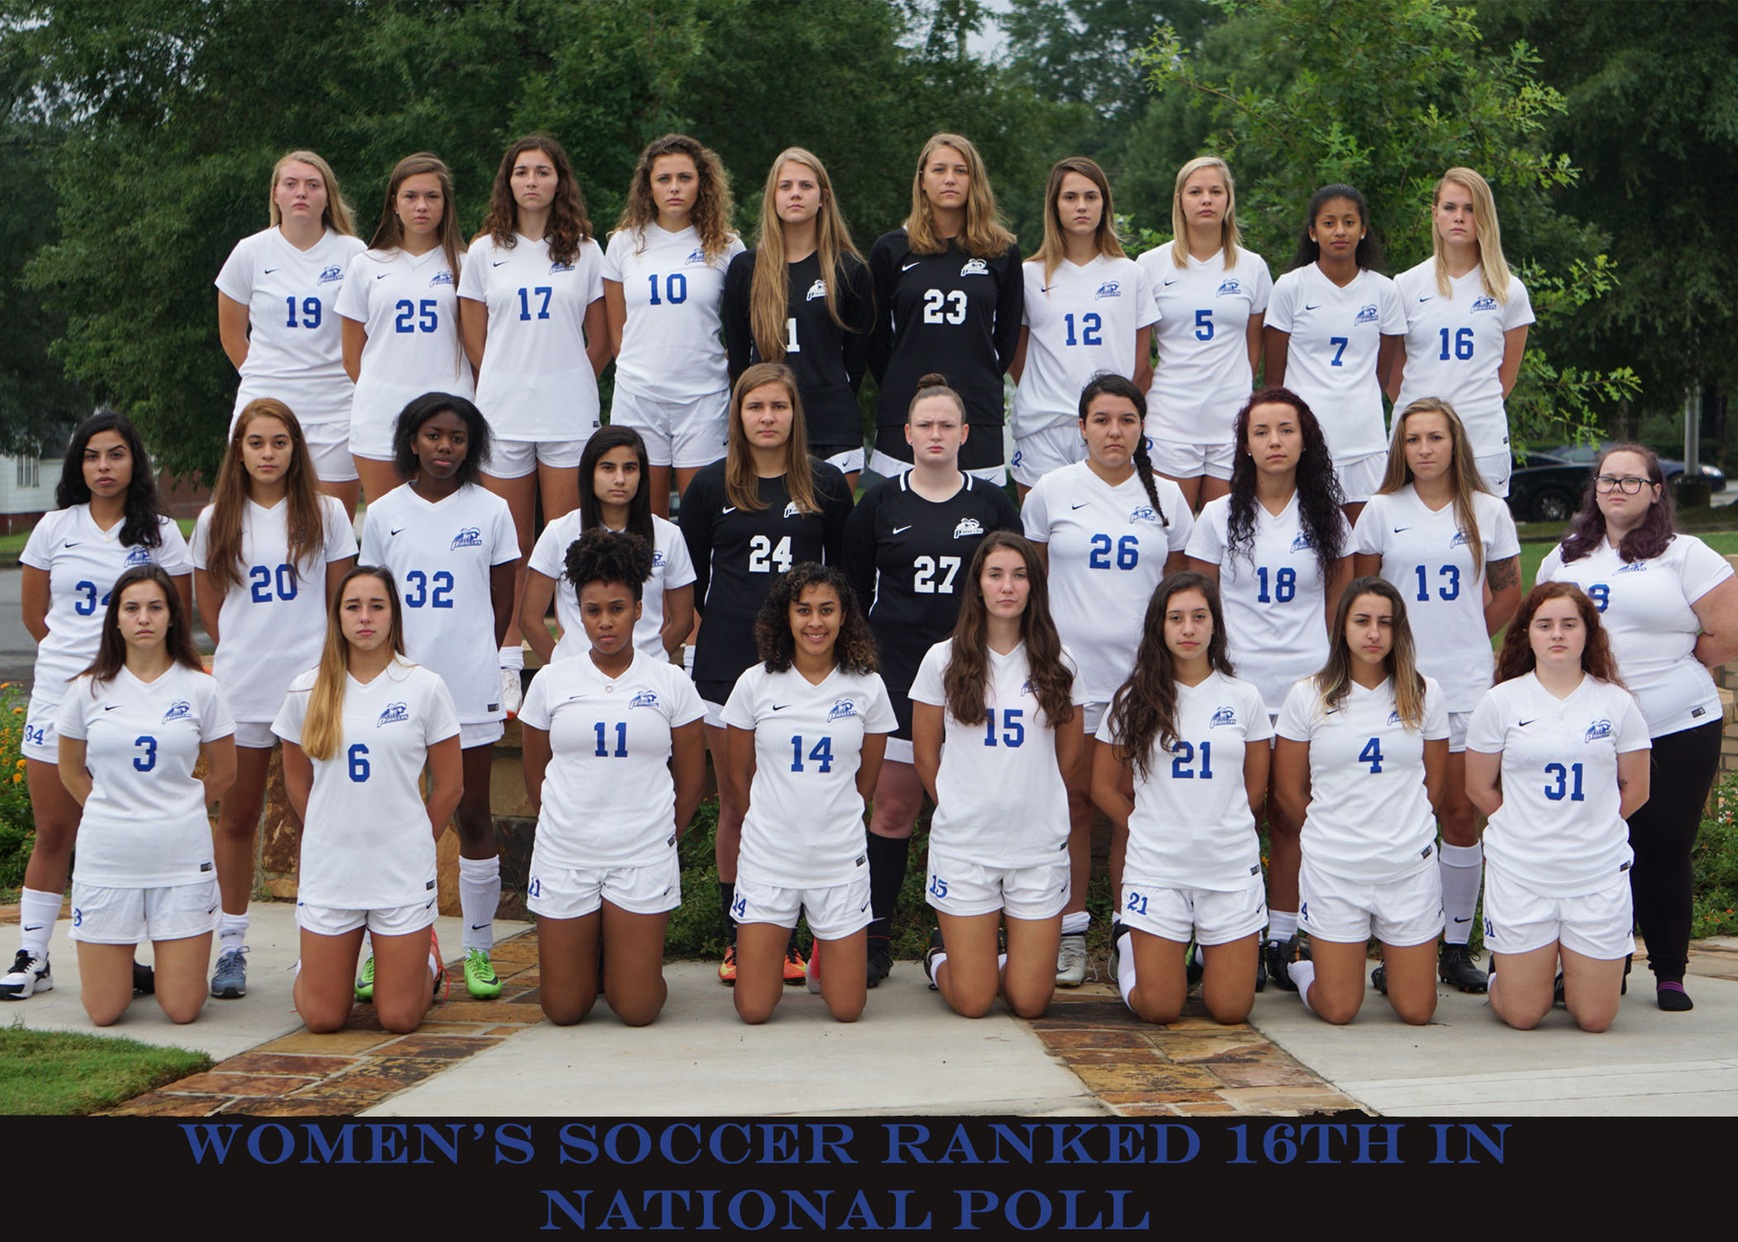 Women's Soccer Ranked 16th in National Poll